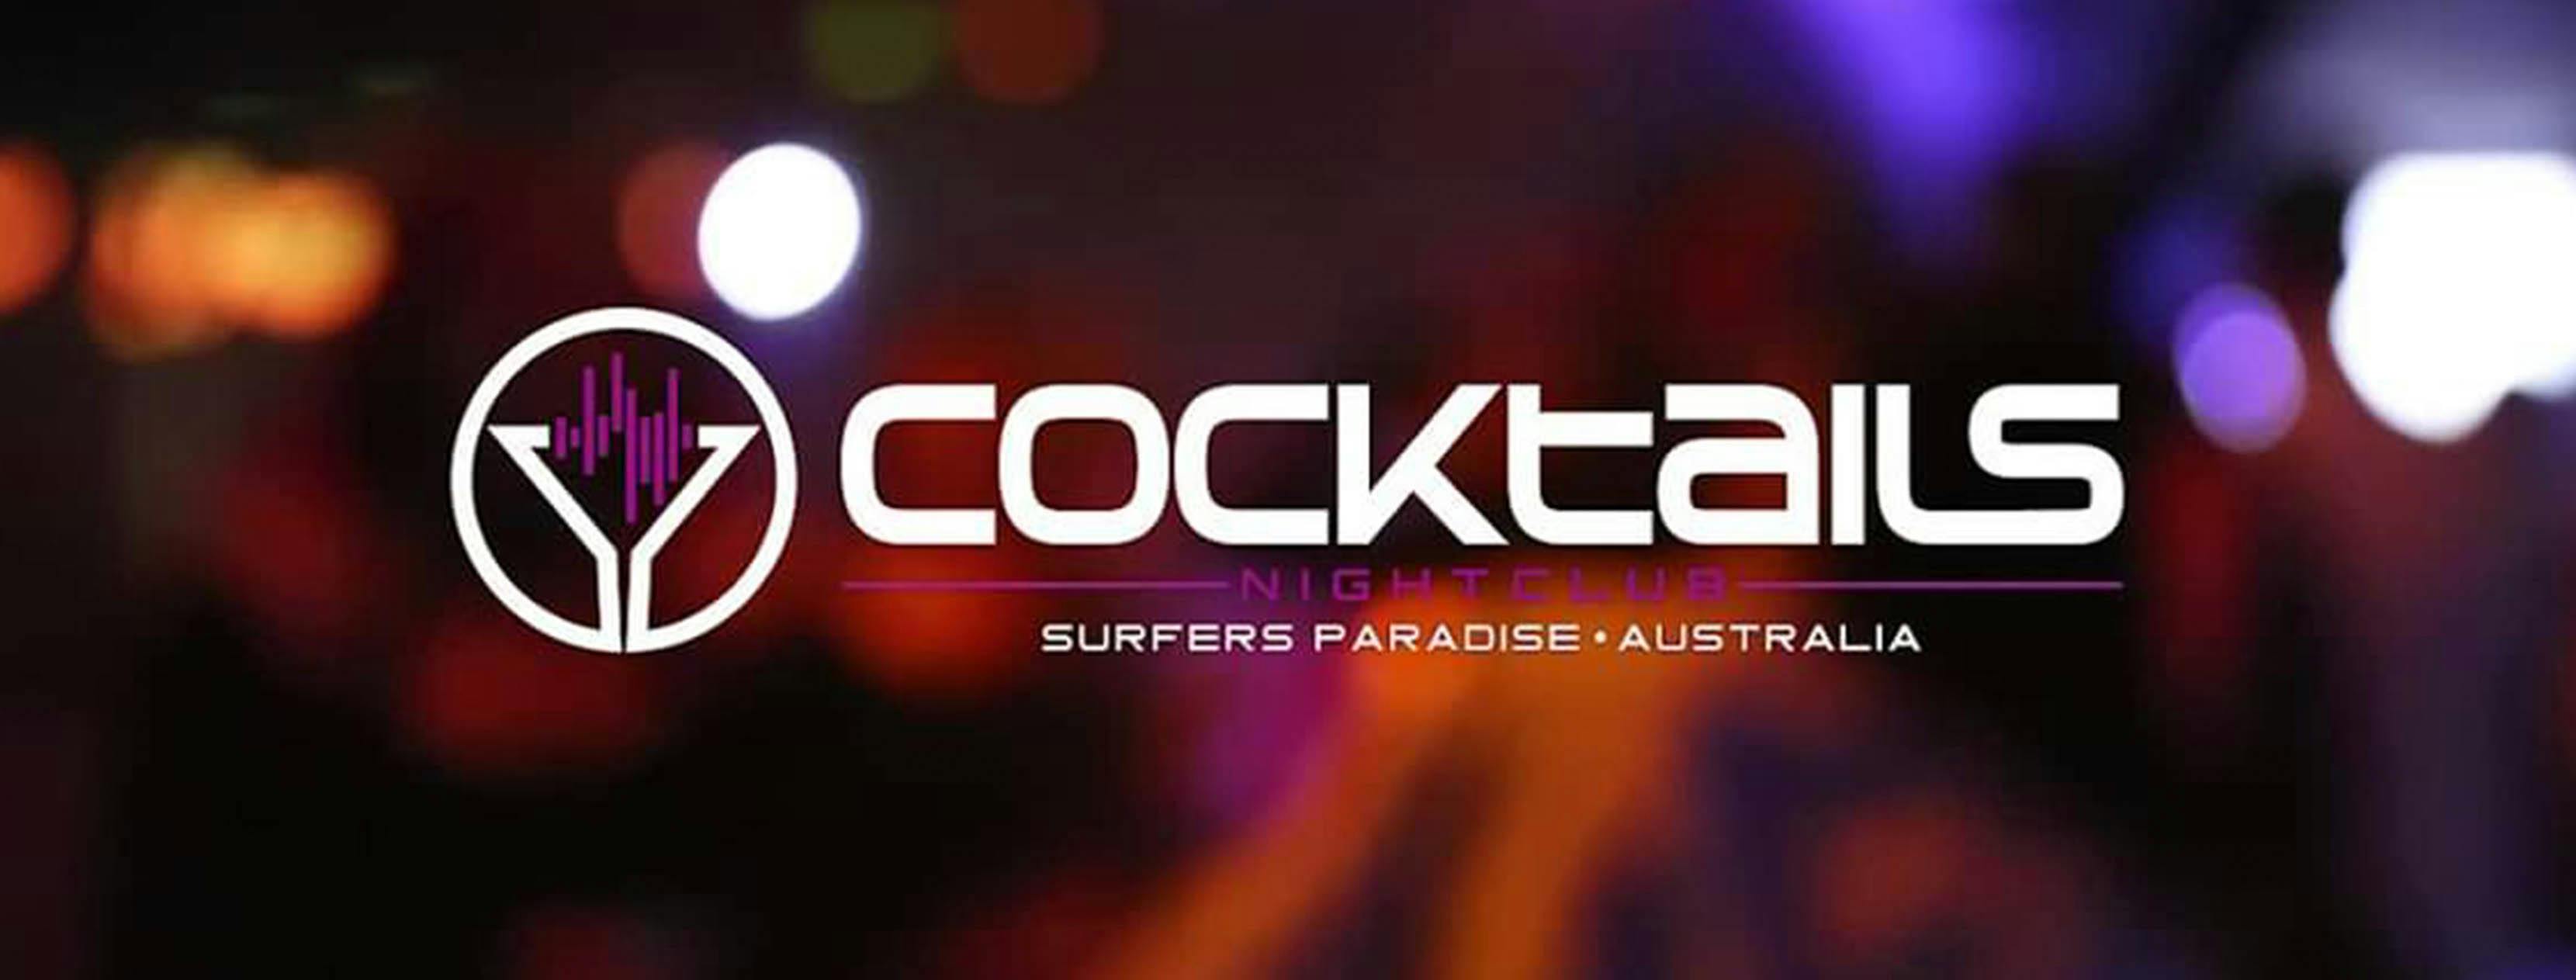 a promotional hero image for cocktails nightclub